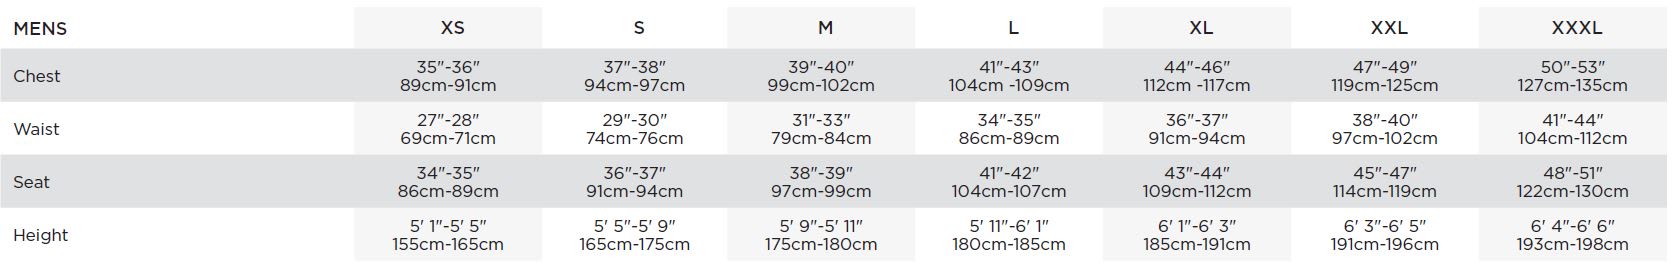 Bauer Men's Apparel Sizing Chart